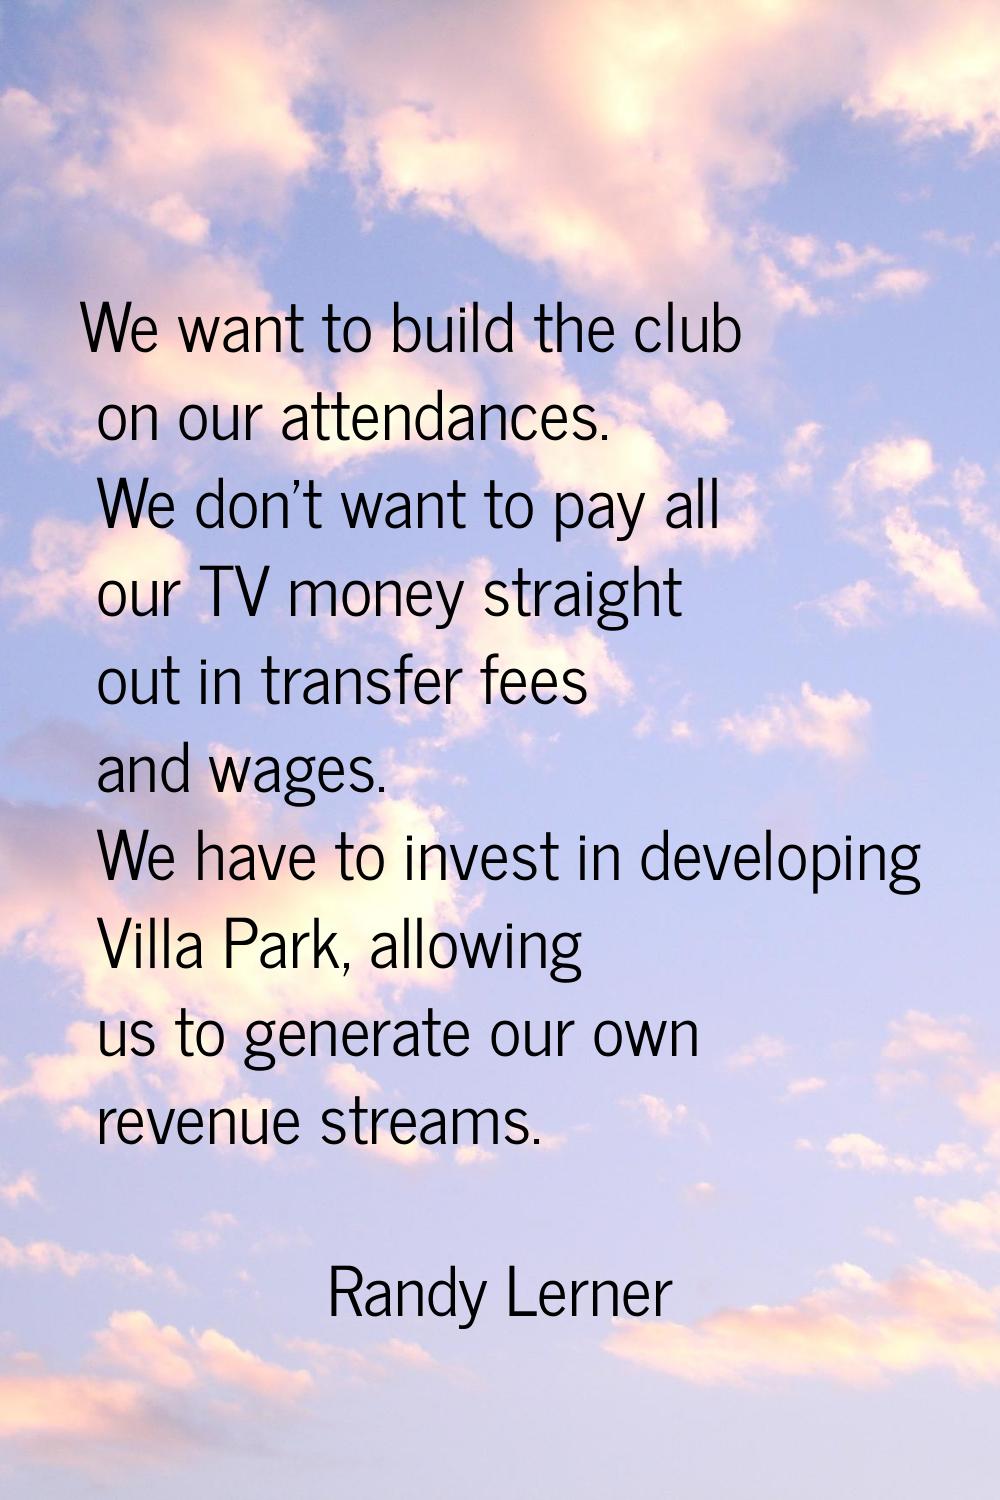 We want to build the club on our attendances. We don't want to pay all our TV money straight out in